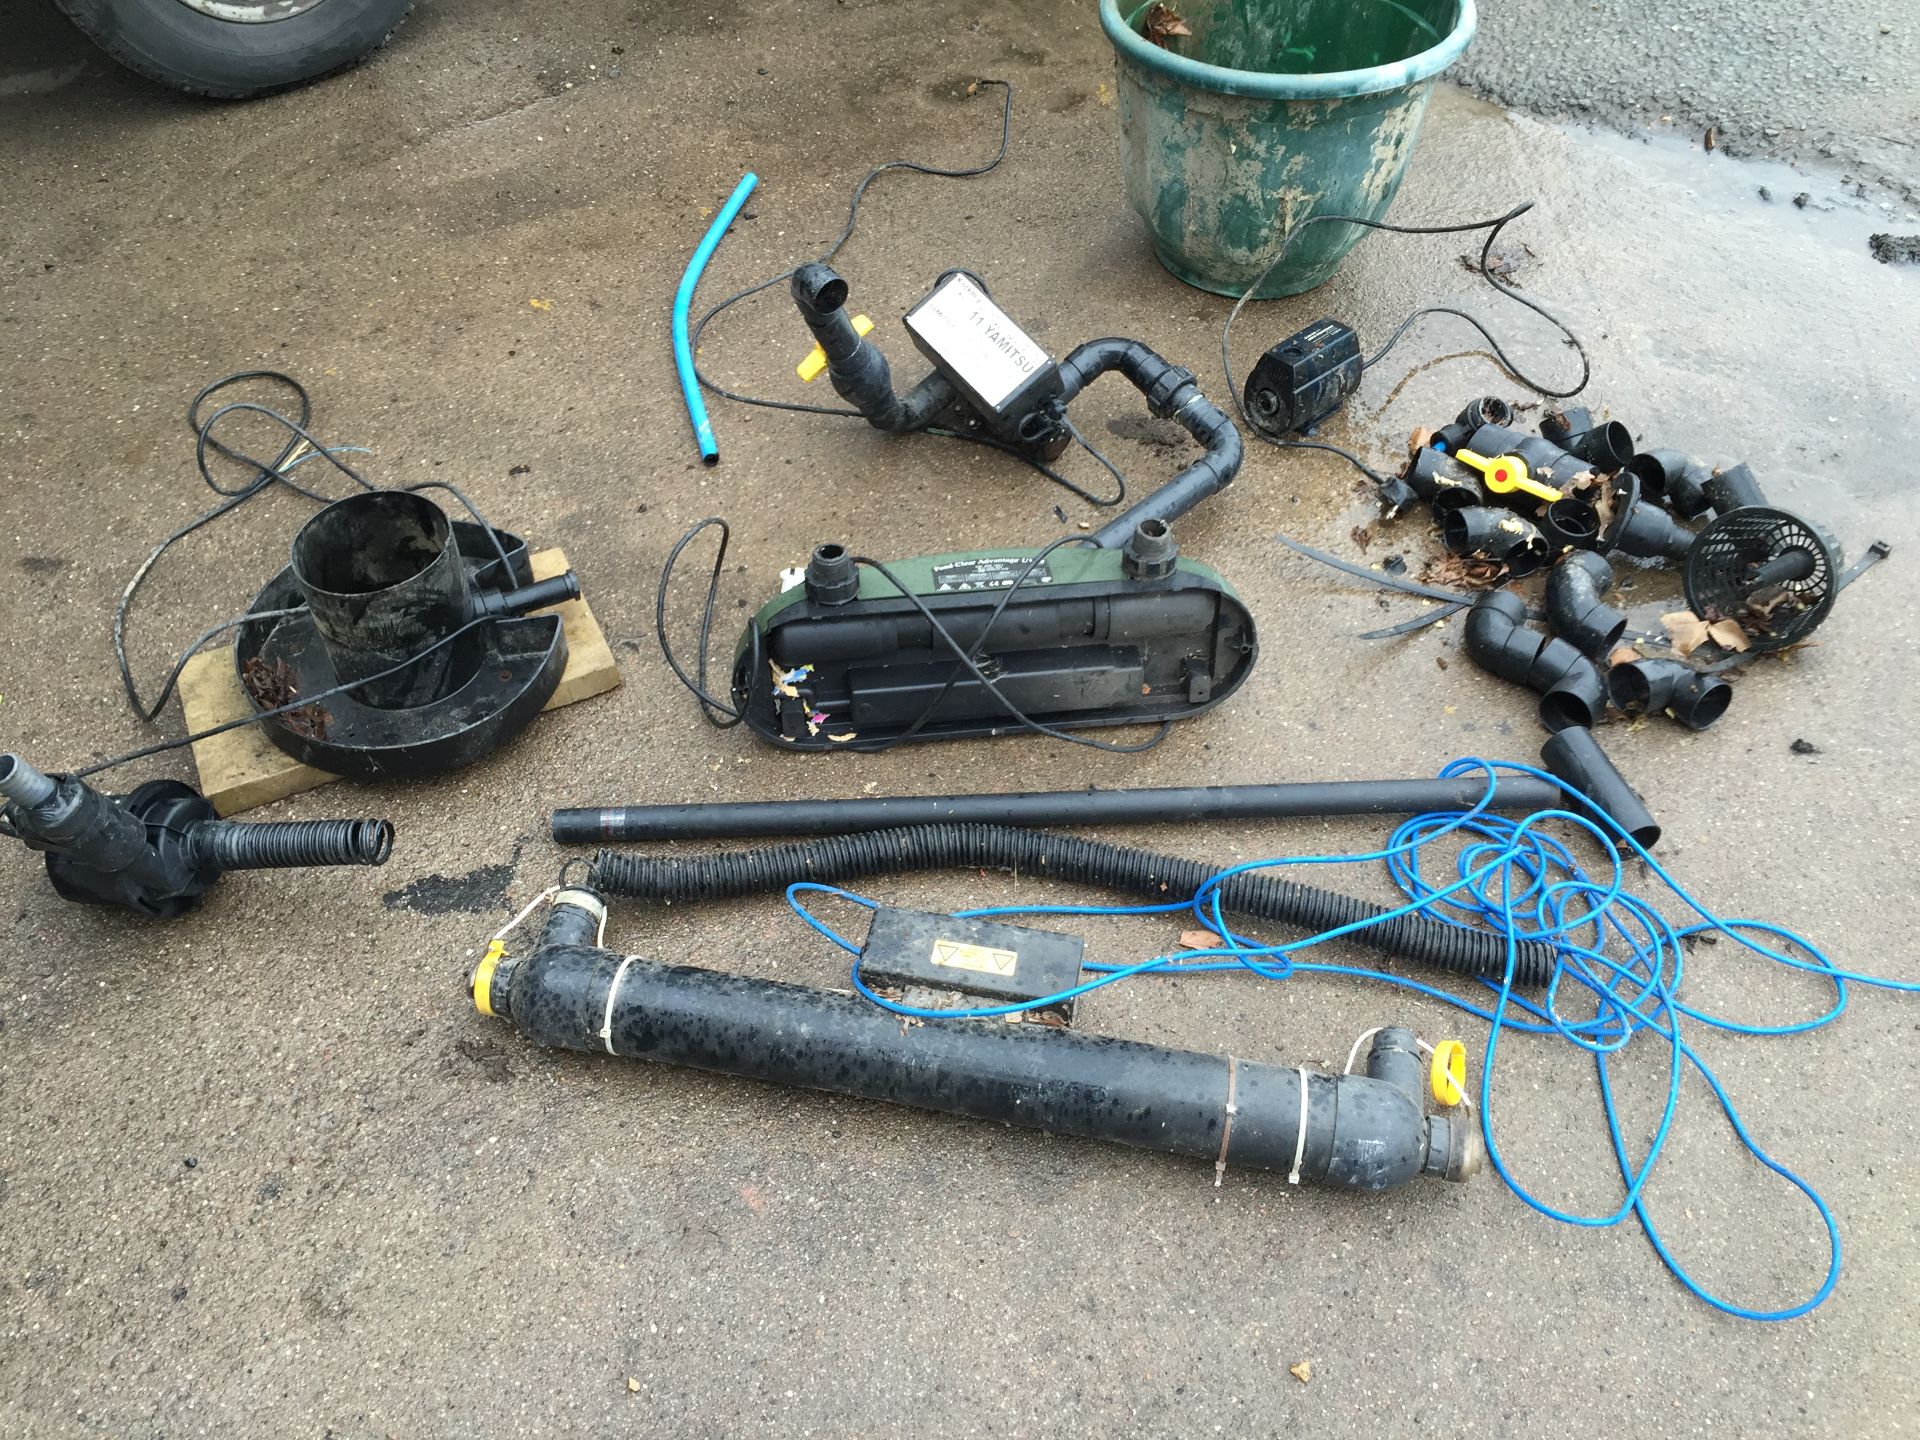 VARIOUS POND EQUIPMENT INCLUDING FILTERS, PIPING AND WATER CLARIFIER -UV FILTER *NO VAT*